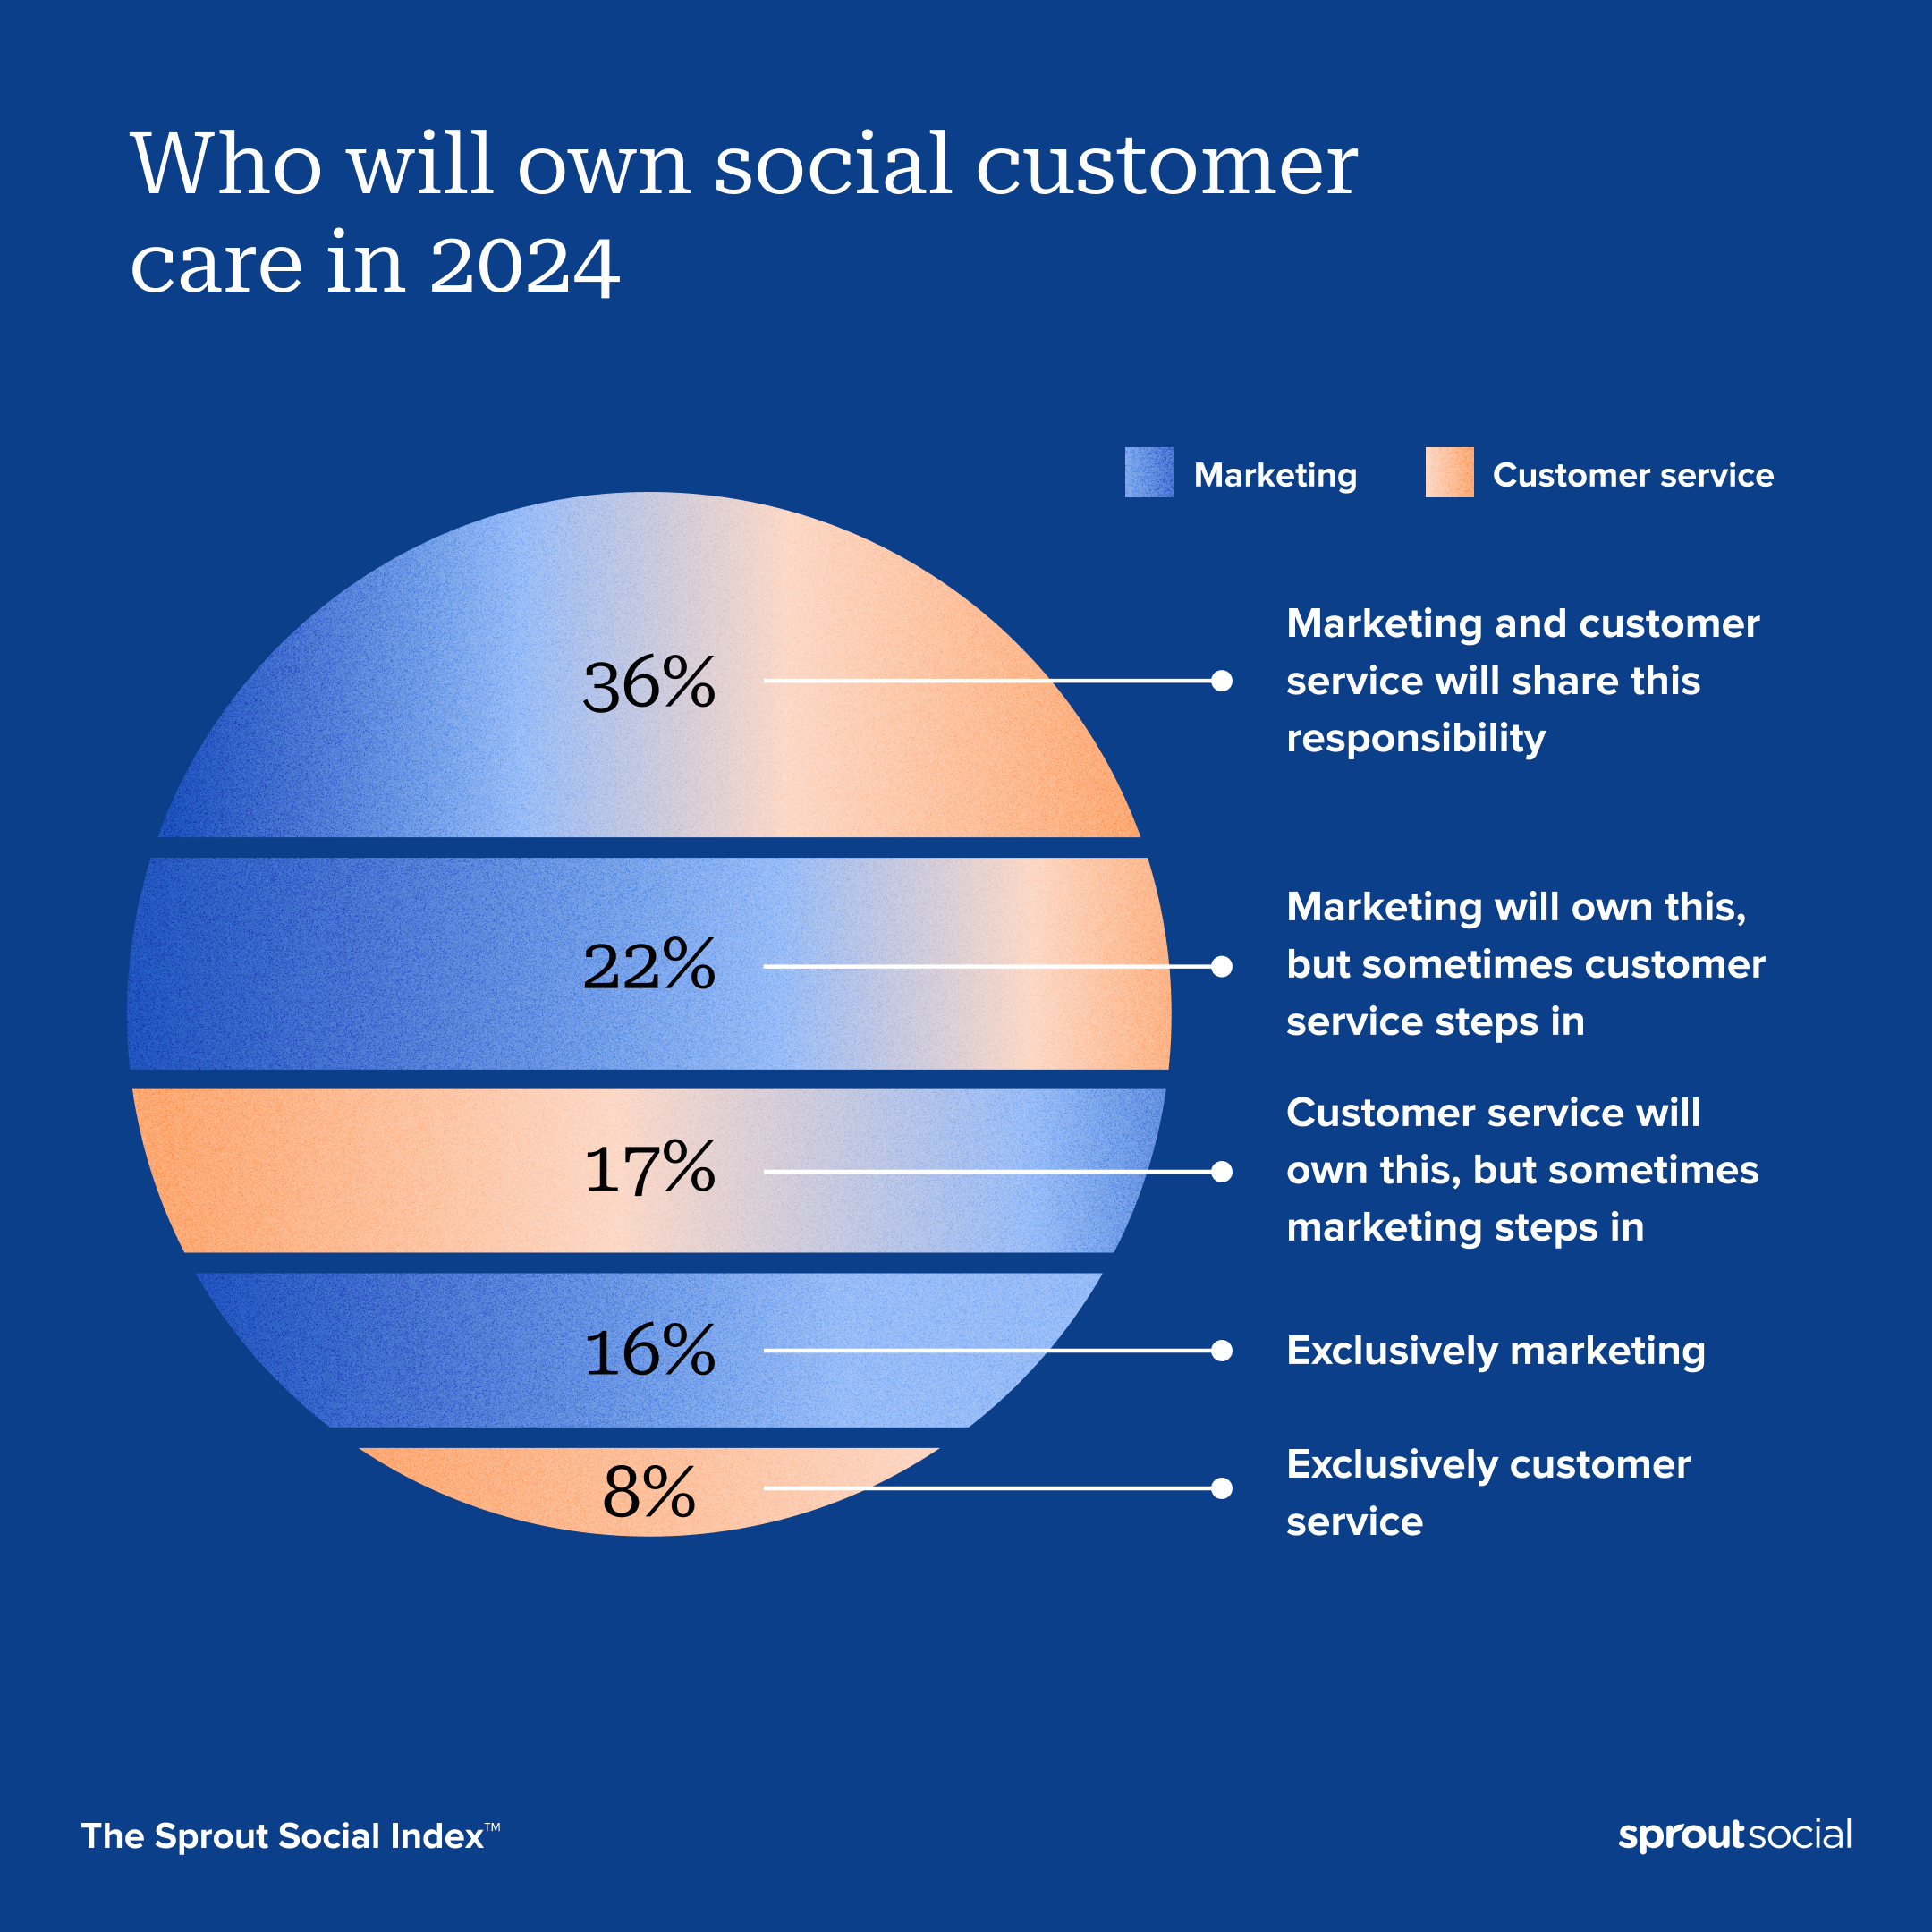 A data visualization with the headline: Who will own social customer care in 2024? The most popular response was from 36% of marketers who said that marketing and customer service will share this responsibility.